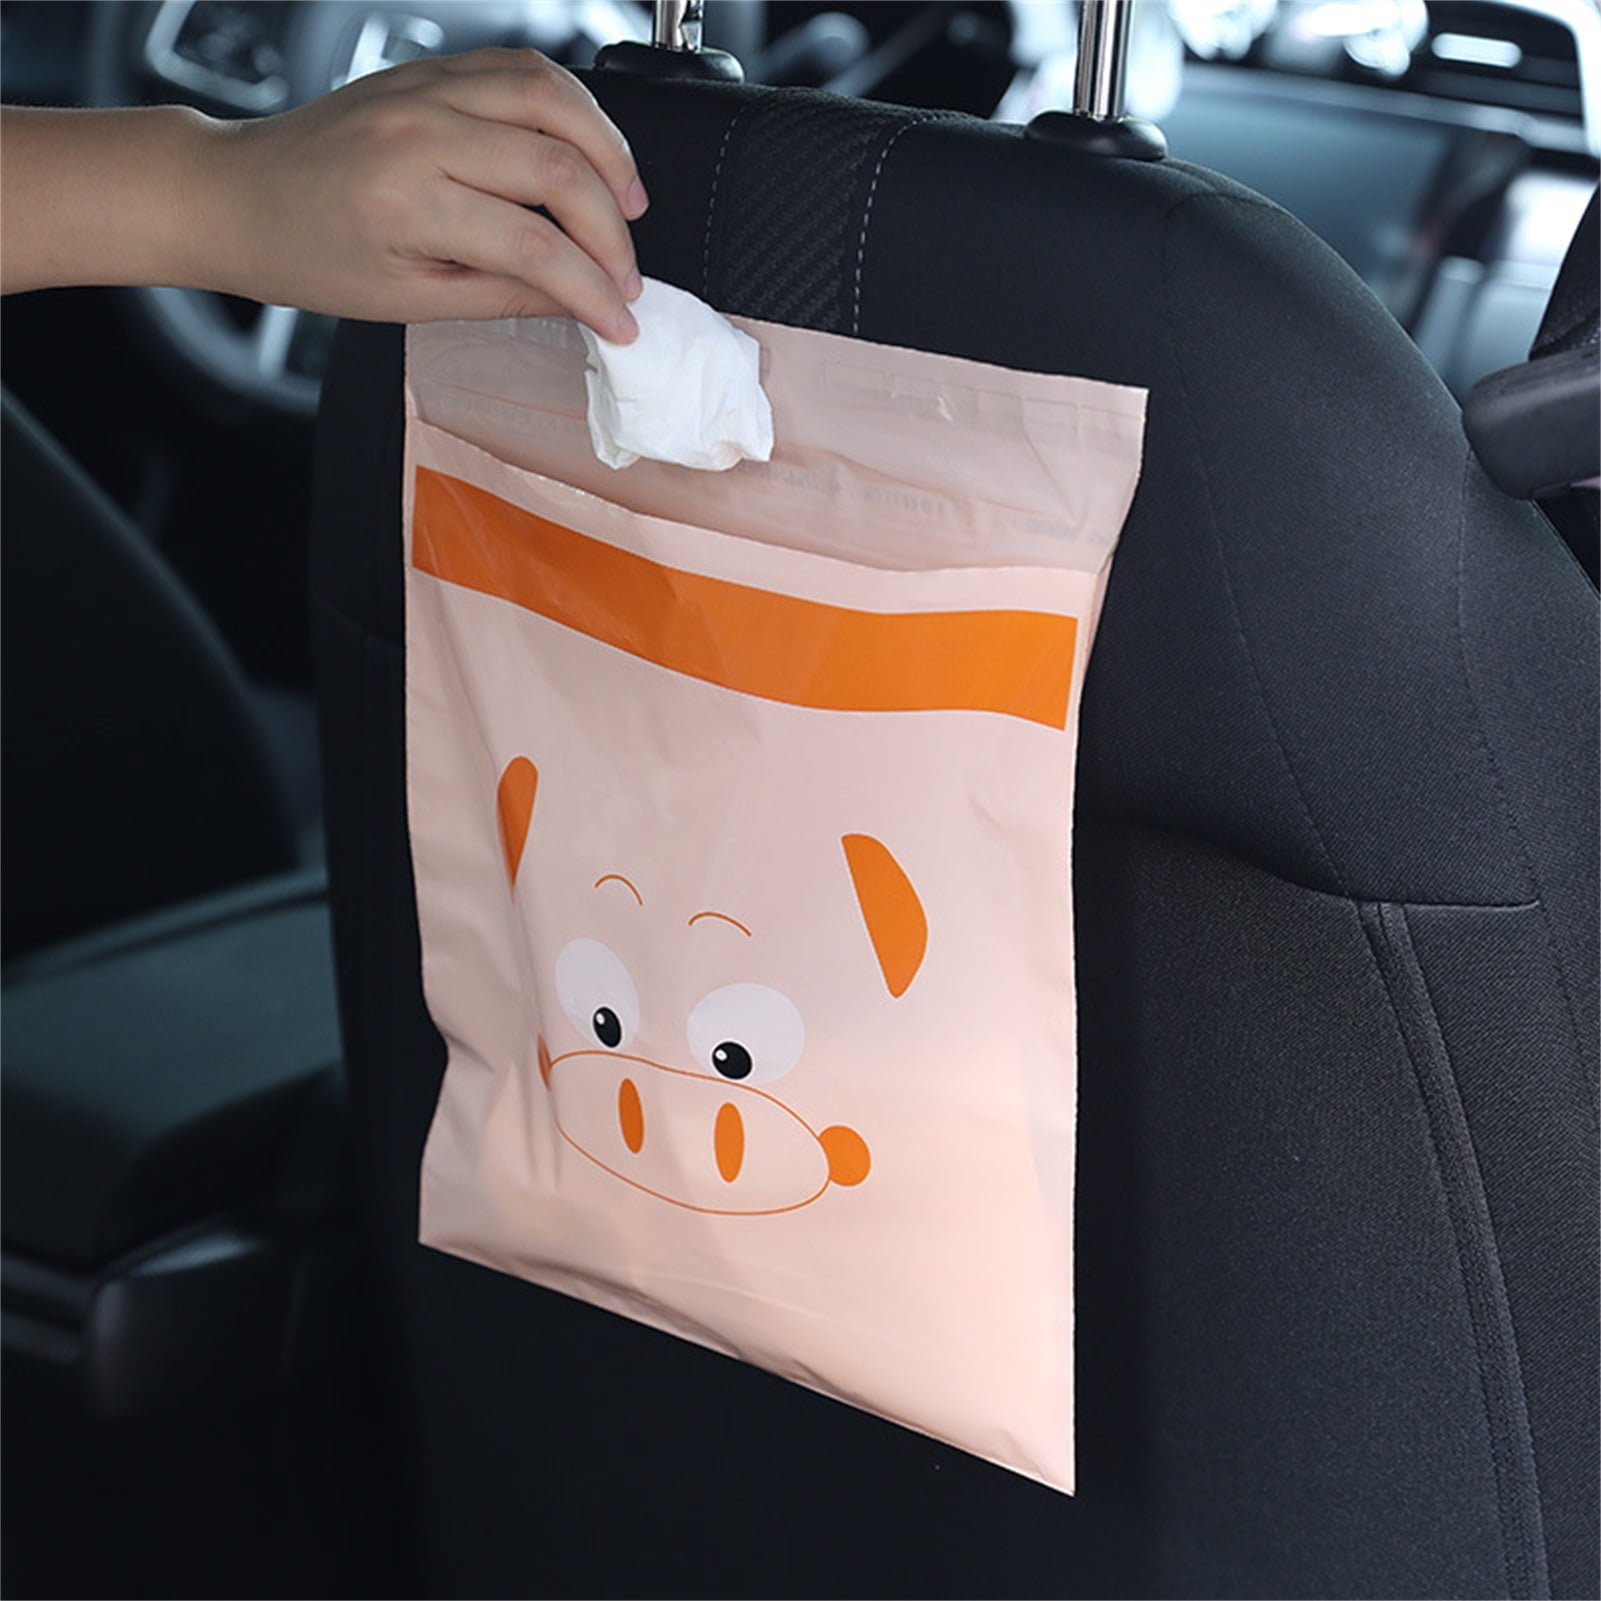 Christmas Decorations Car Bag Disposable Garbage Bag Home Self-adhesive  Cleaning Bags 15pcs 